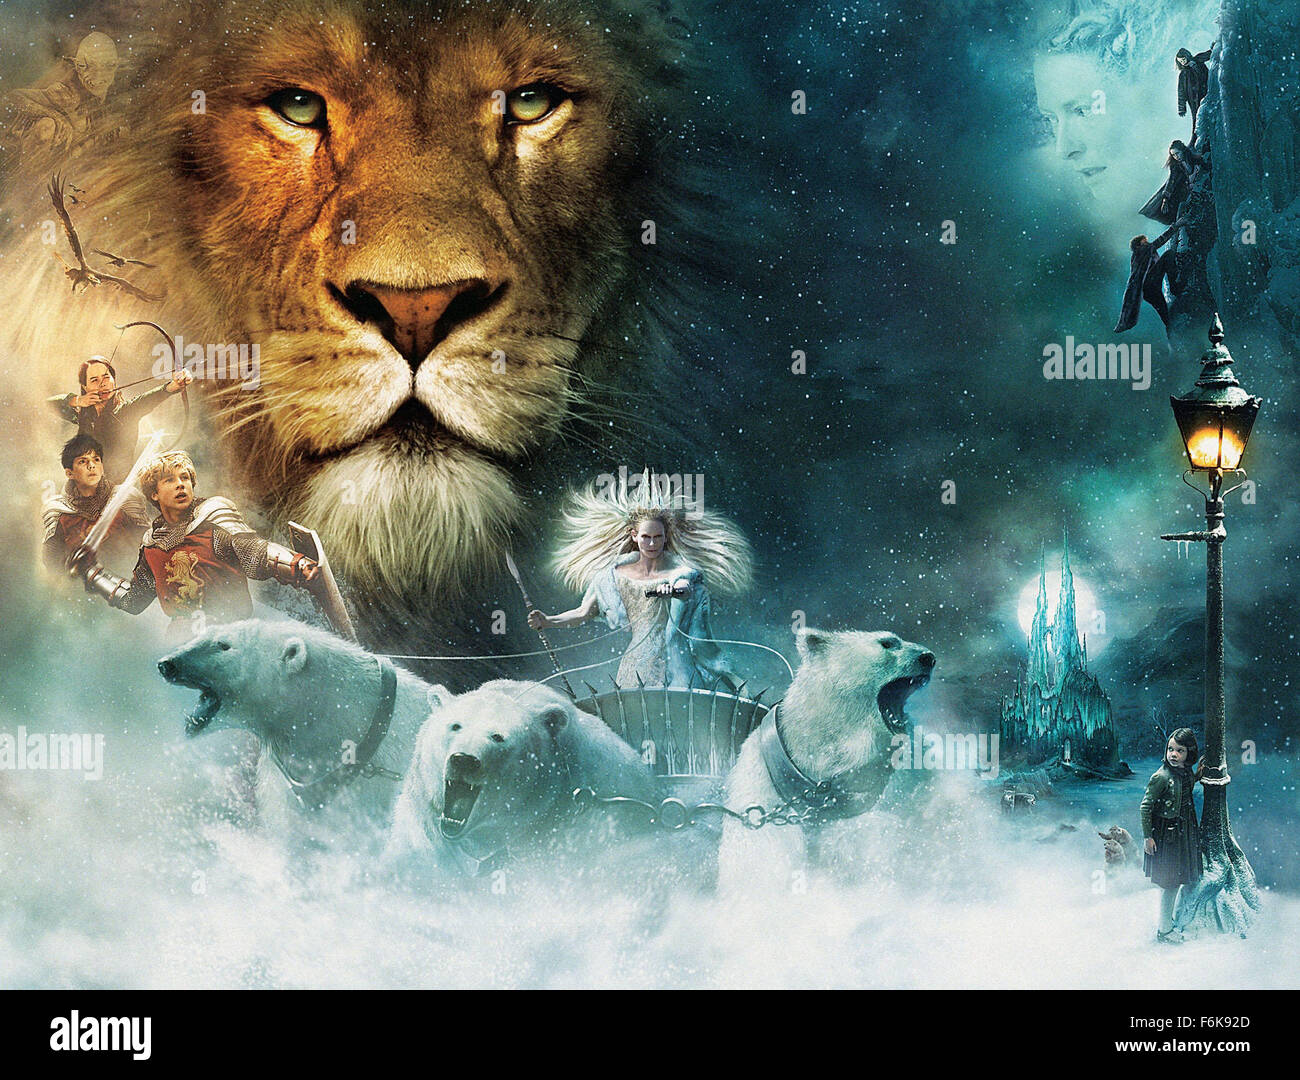 narnia 2005 full movie for mobile fzmovies